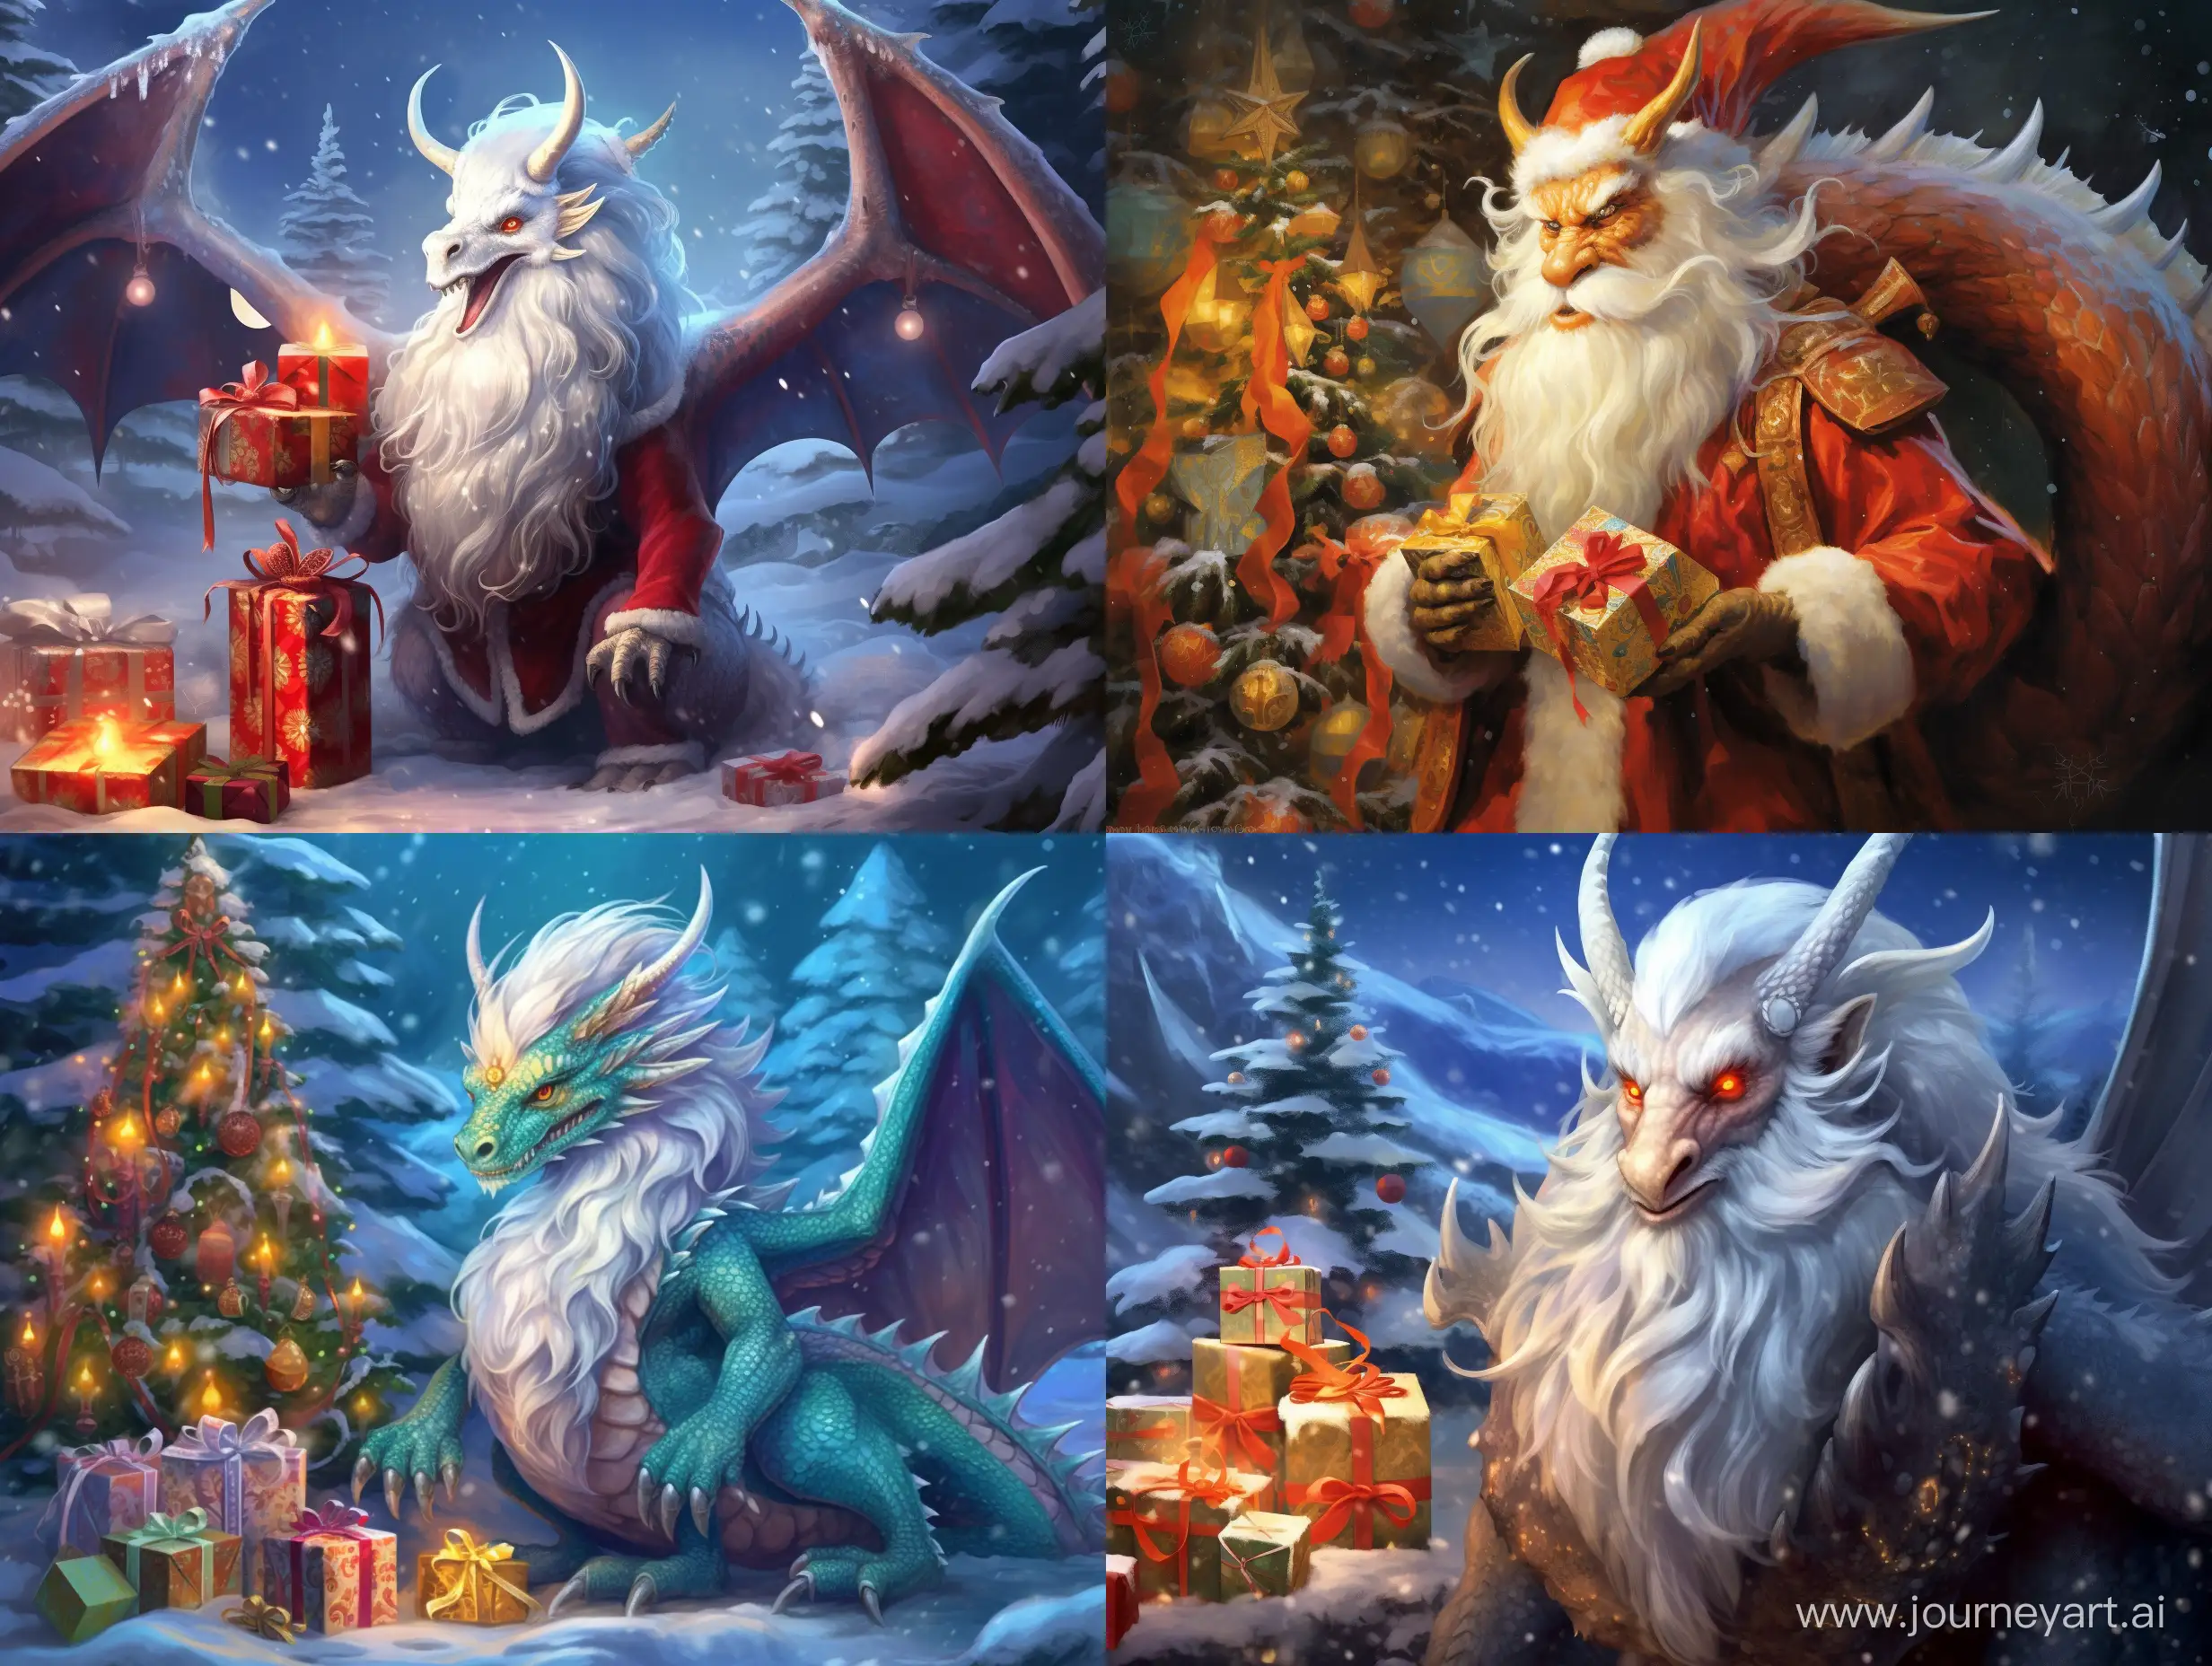 Festive-Dragon-and-Ded-Moroz-Surrounded-by-Winter-Gifts-and-New-Years-Greetings